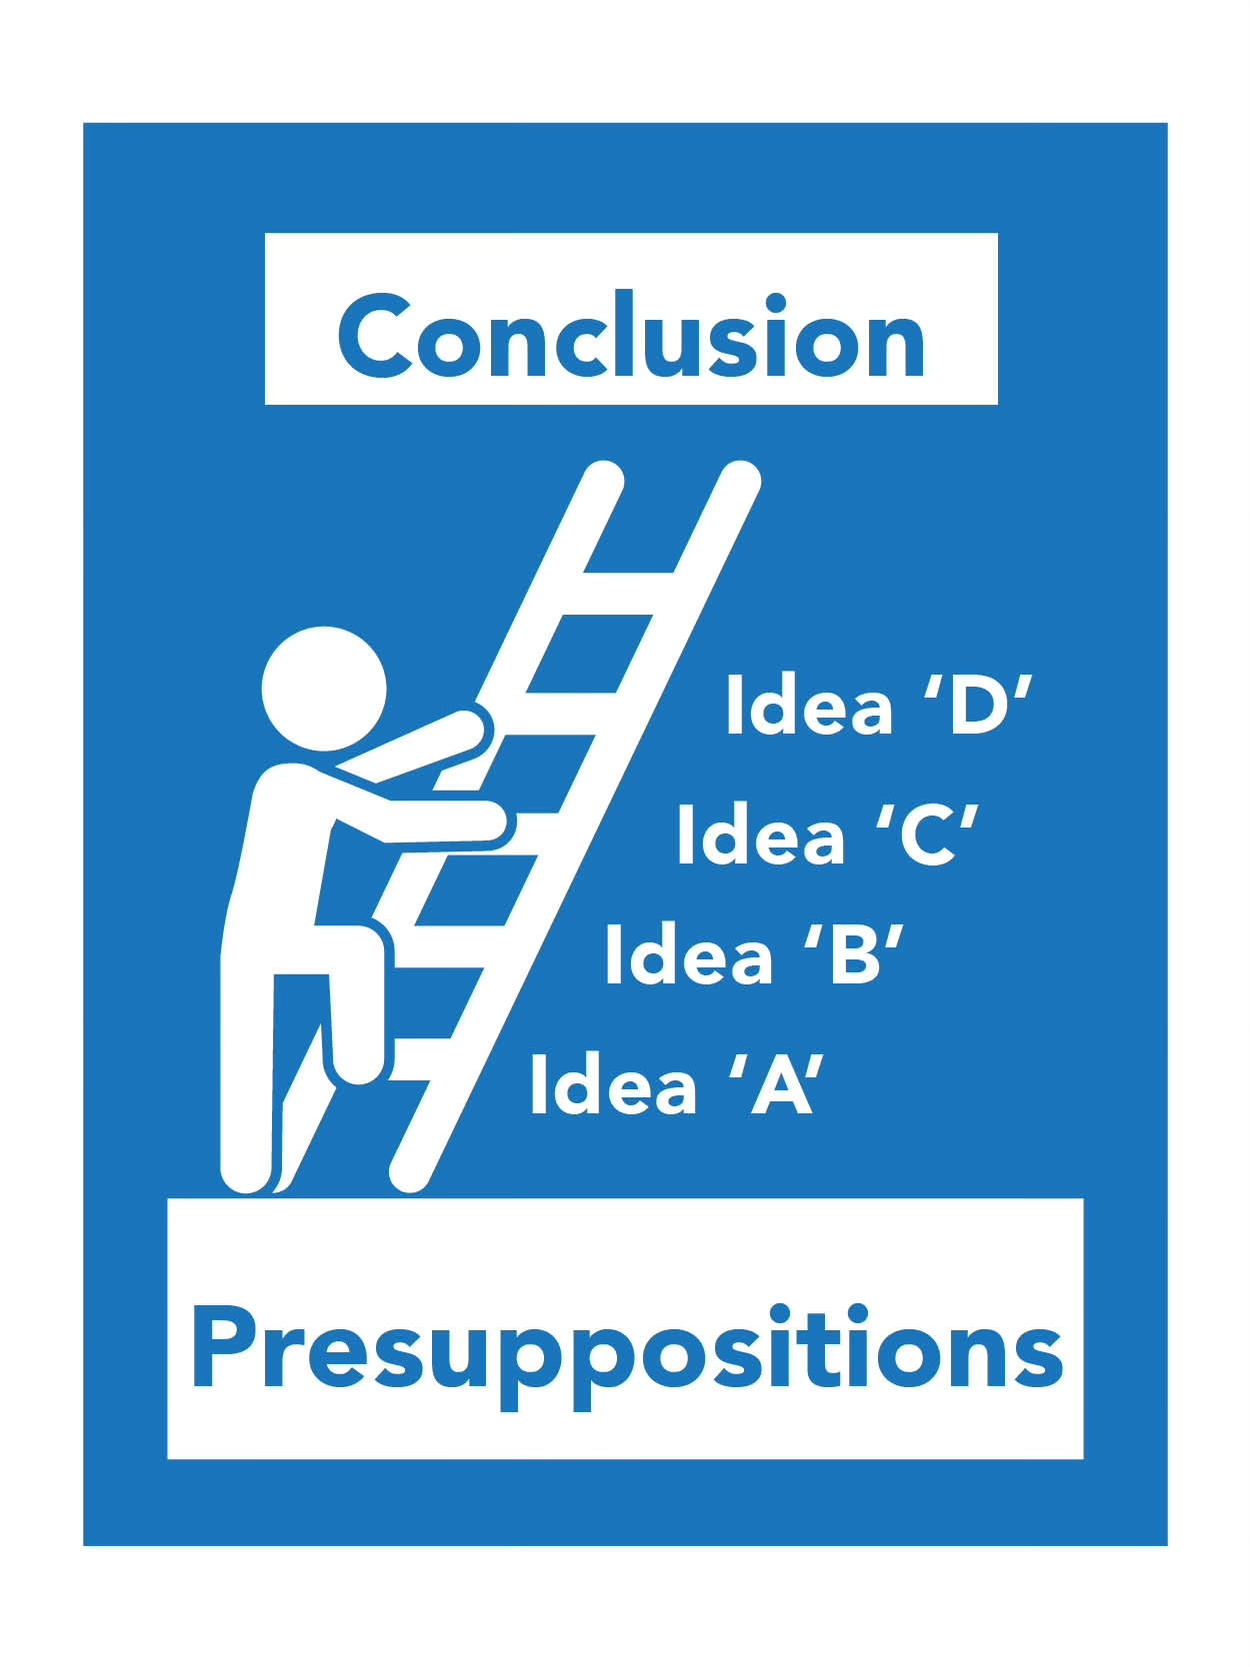 ladder image illustrating presuppositions and conclusion